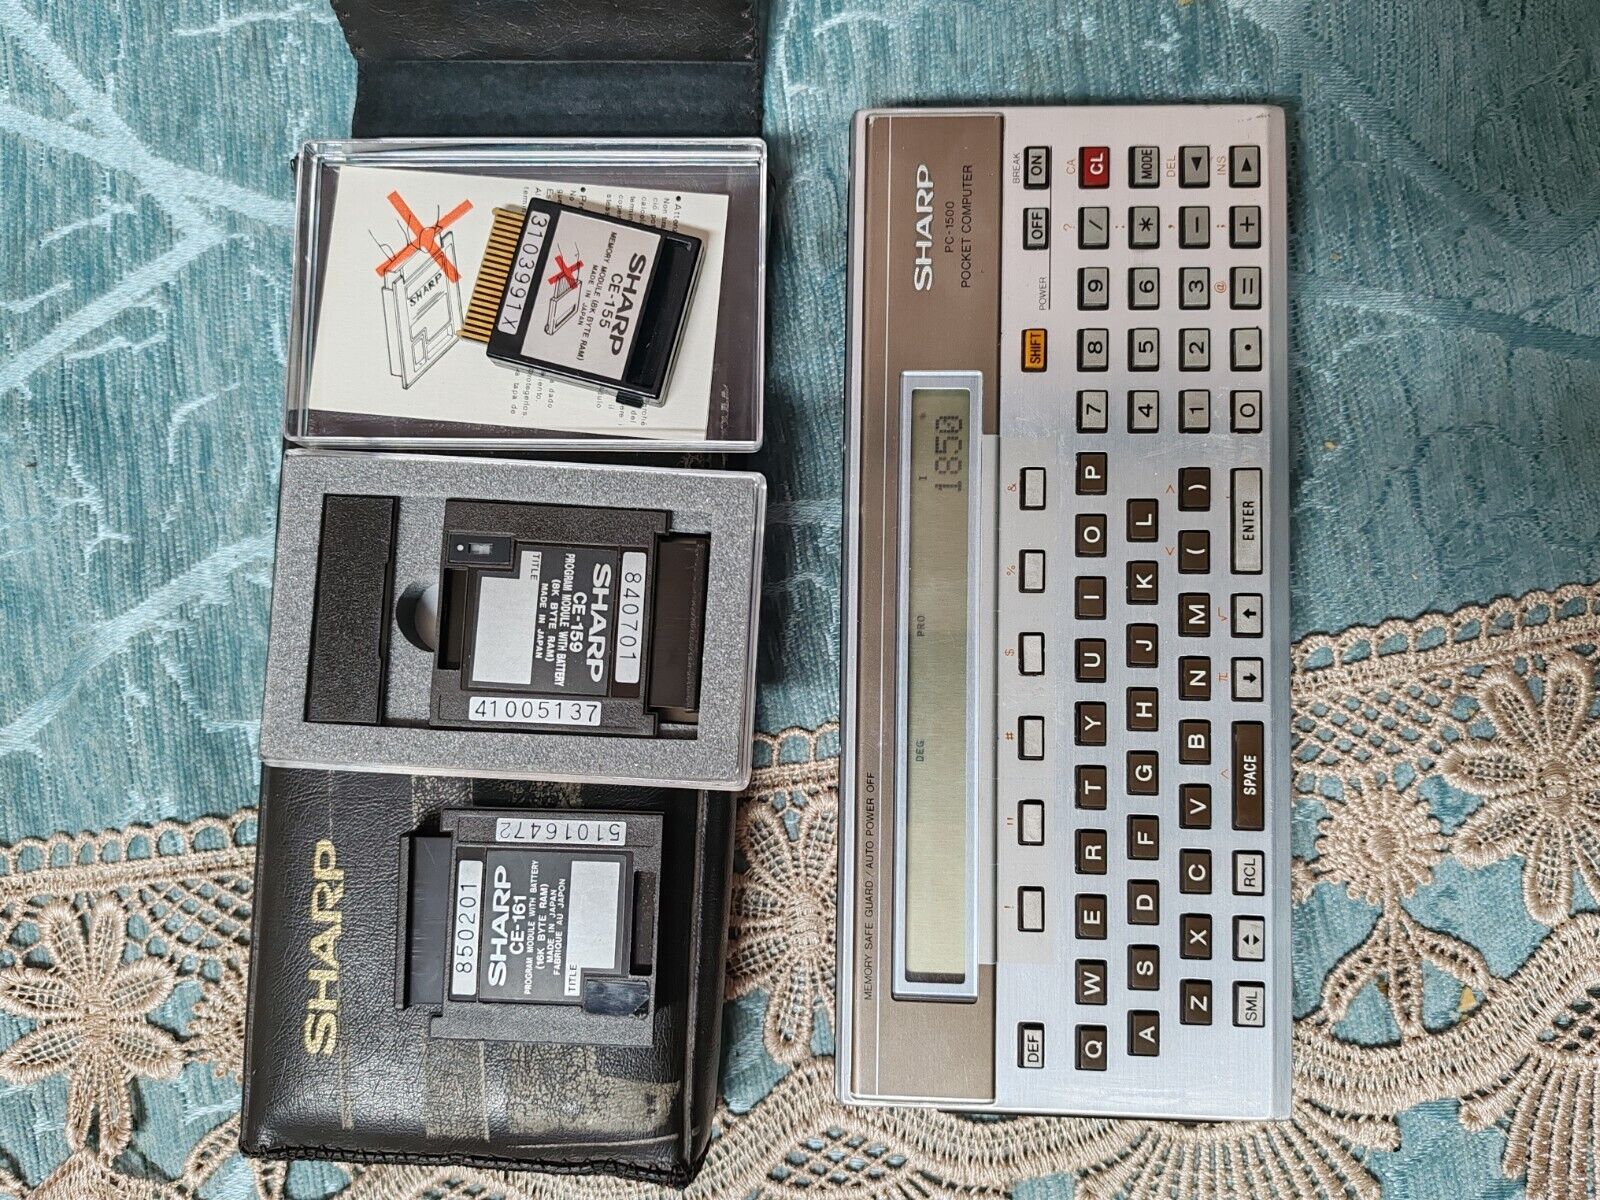 Vintage SHARP PC1500 calculator with CE-155, CE-159, CE-161 in good condition